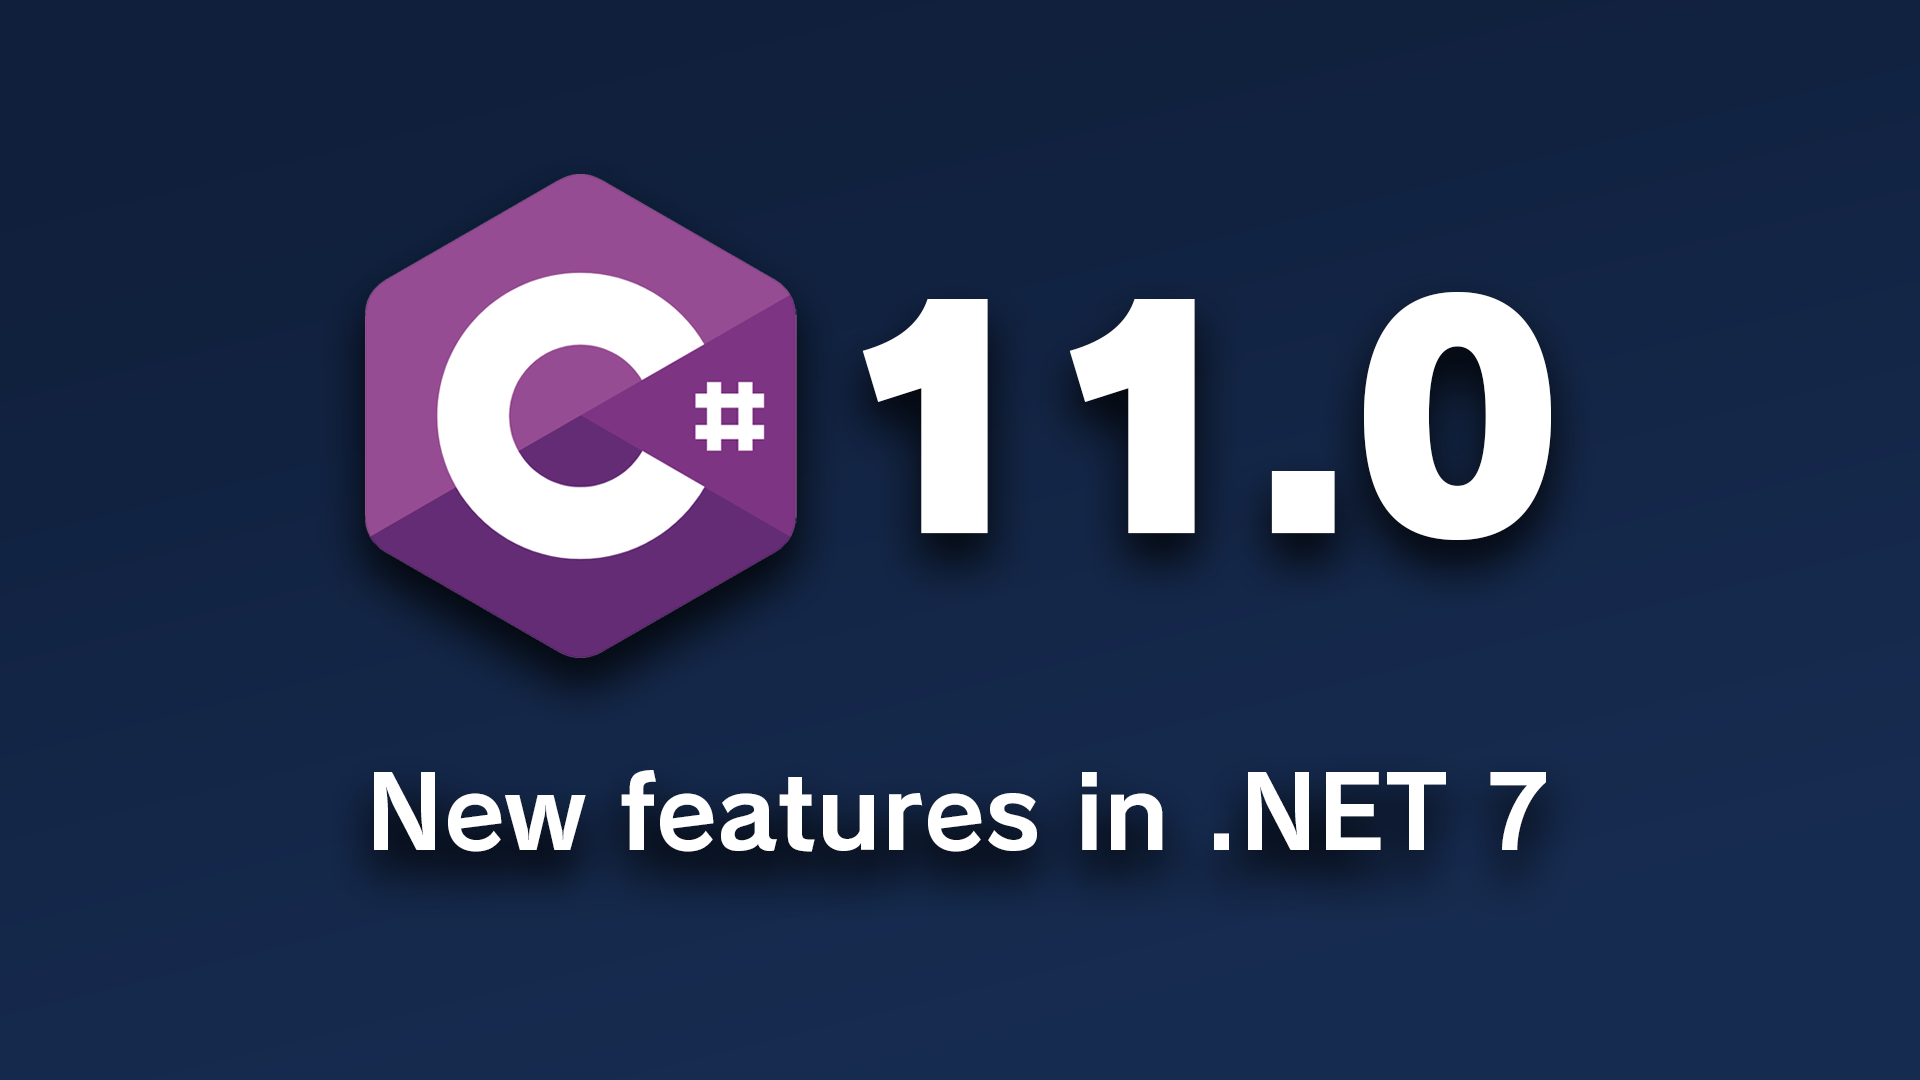 image from C# 11 and .NET 7 - early look at new features